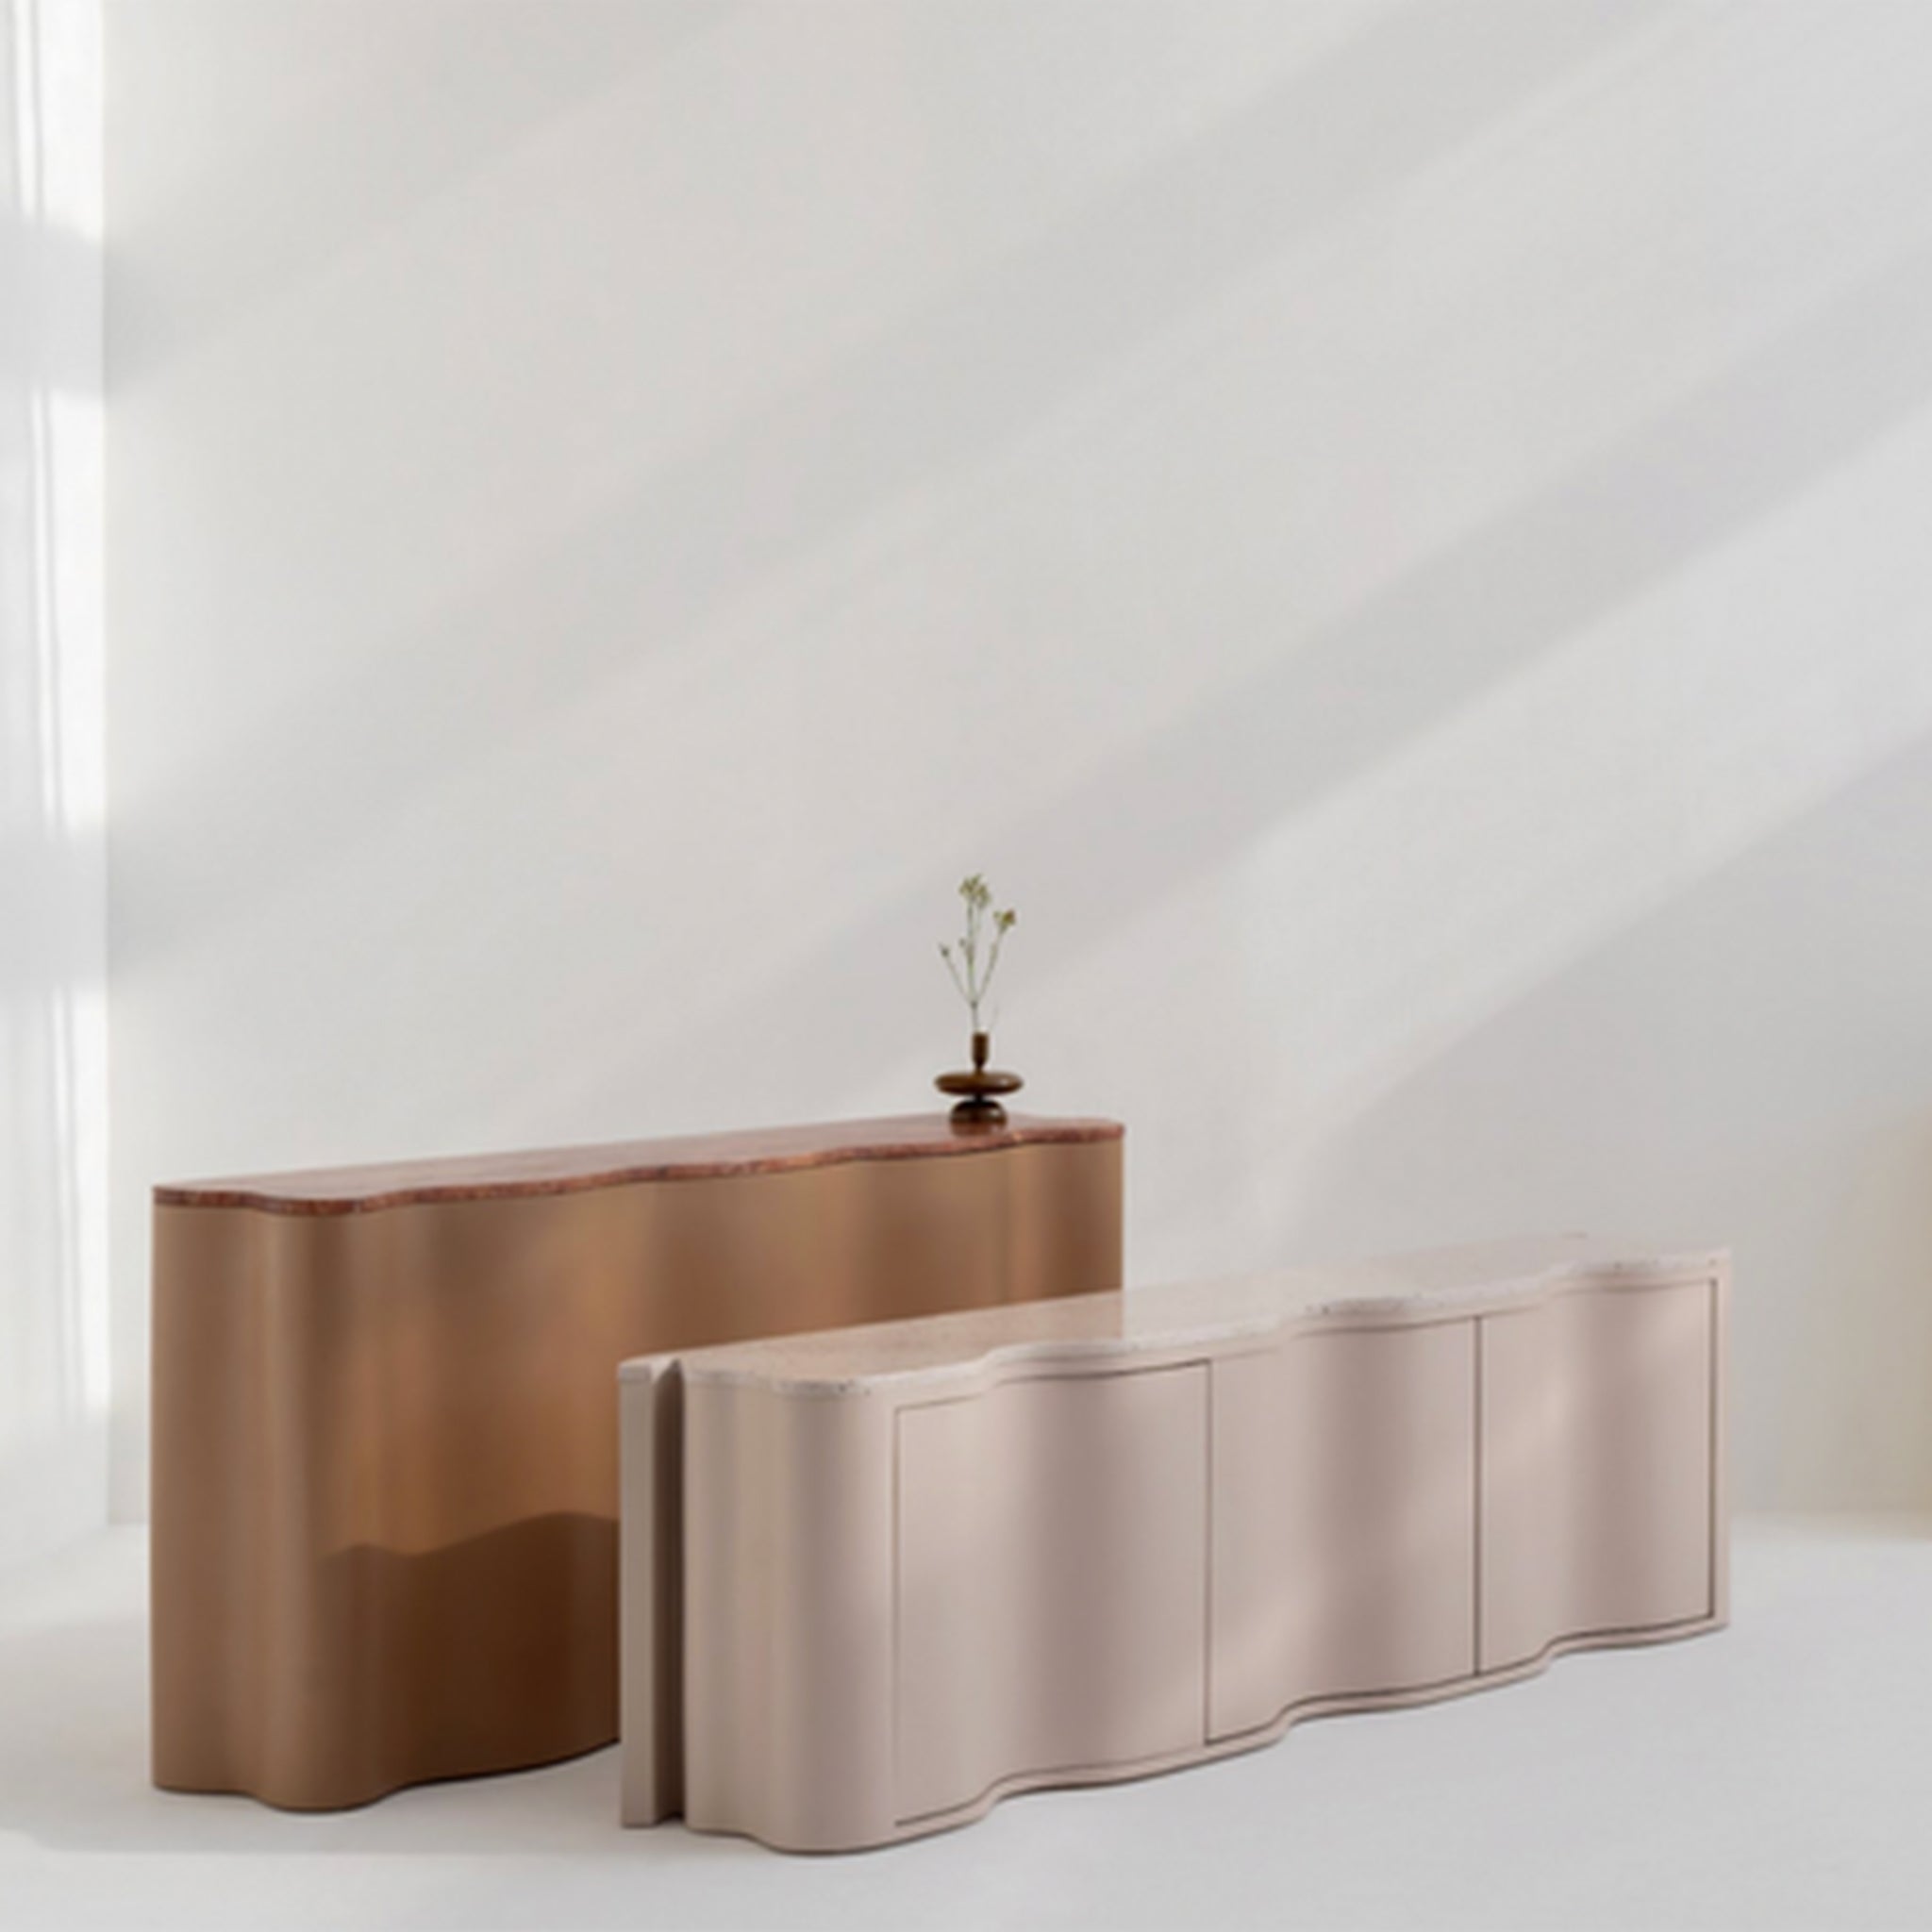 Low Profile Coffee Table: Noah offers a spacious feel for smaller areas.